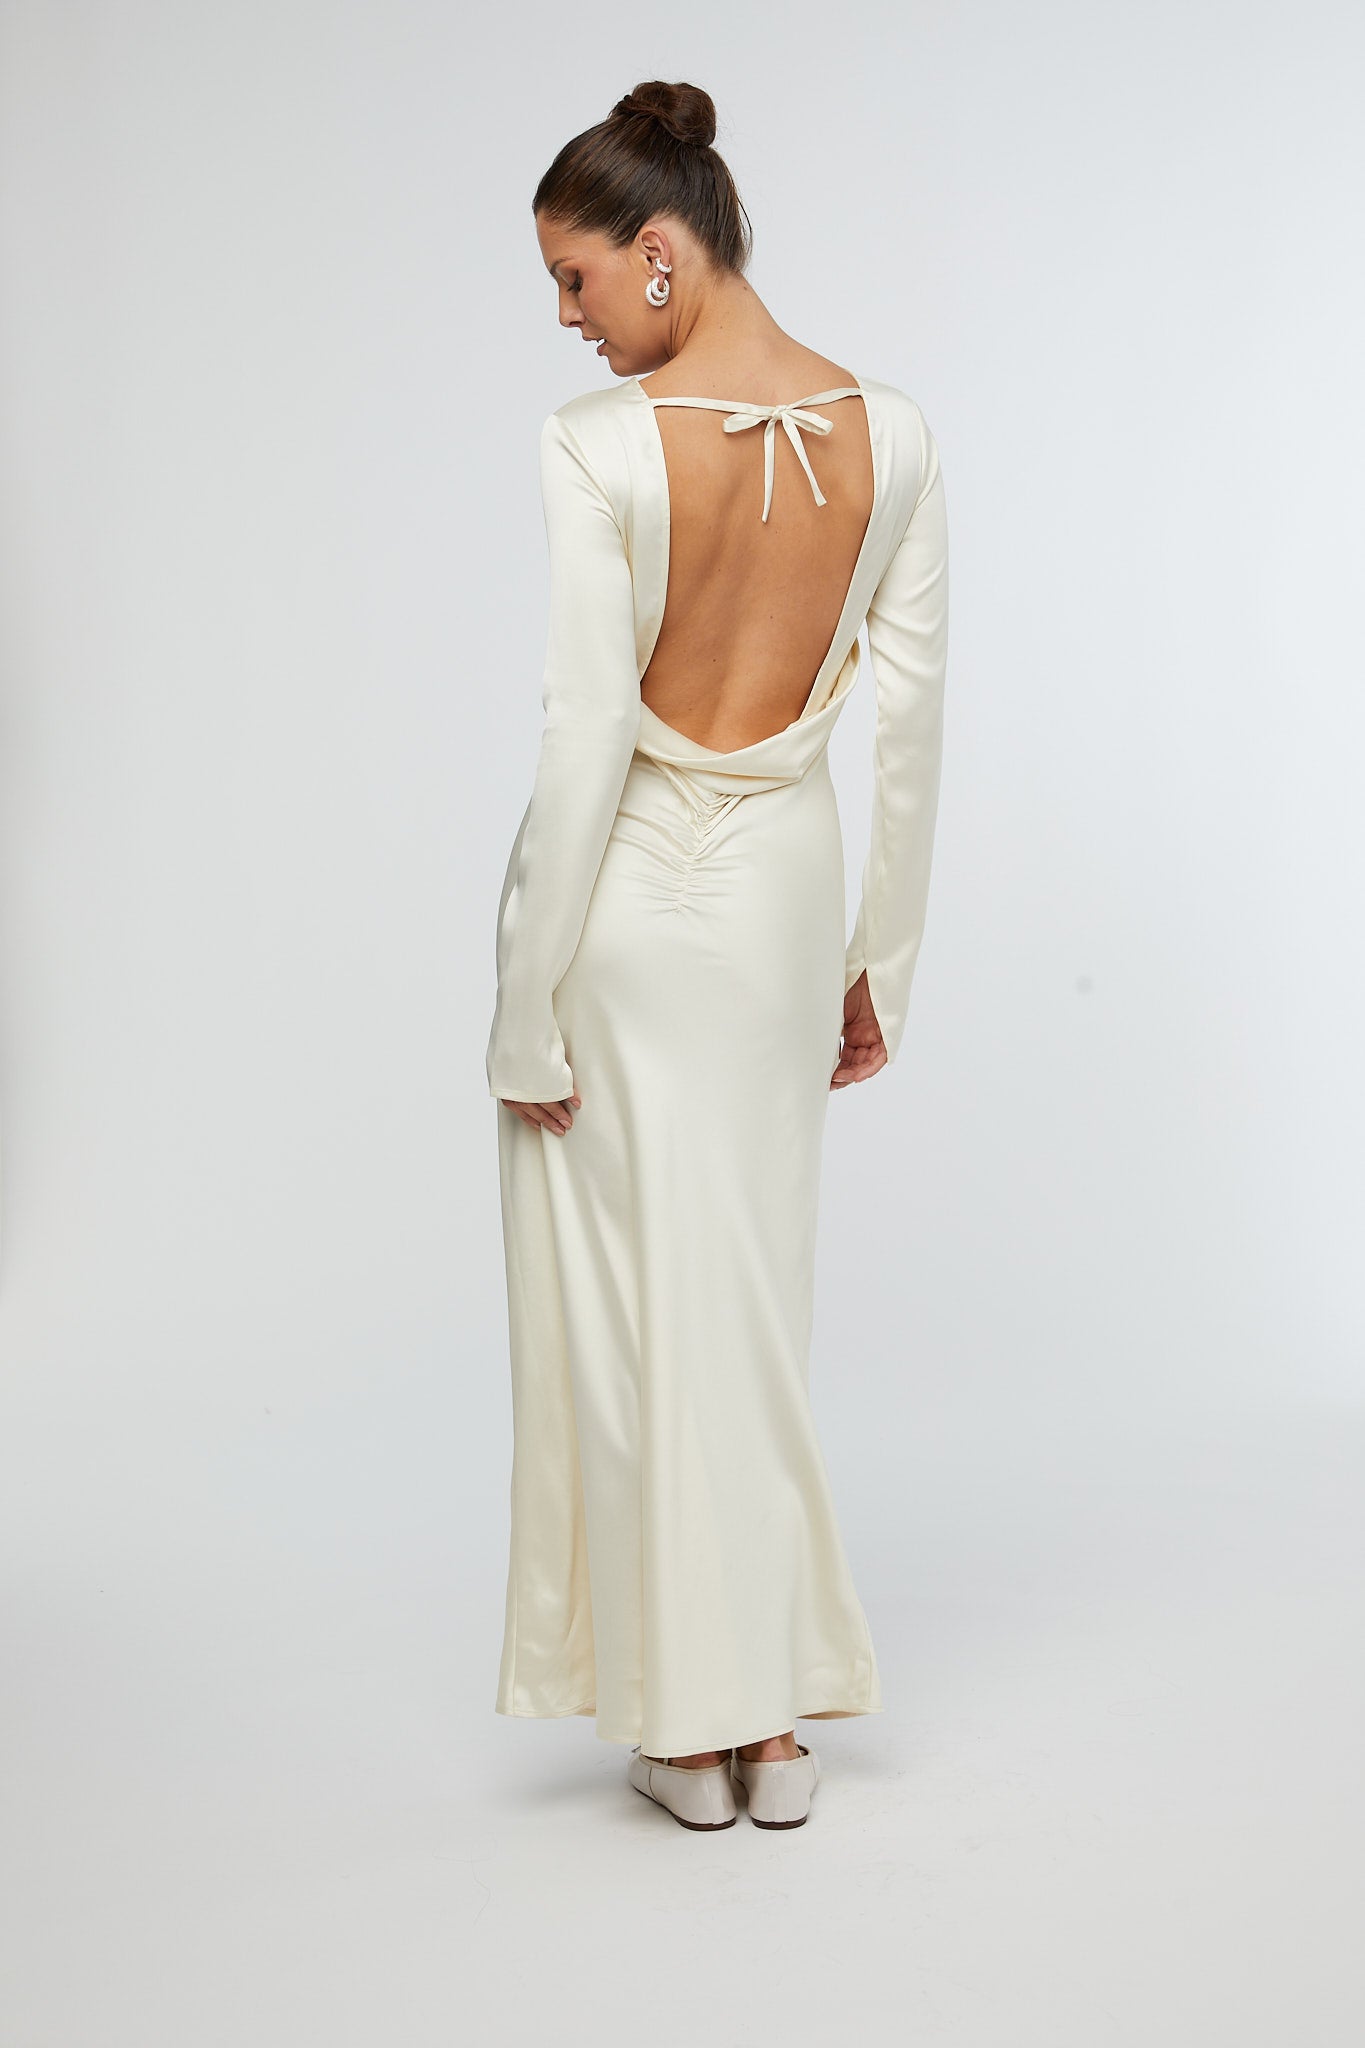 Backless Gown